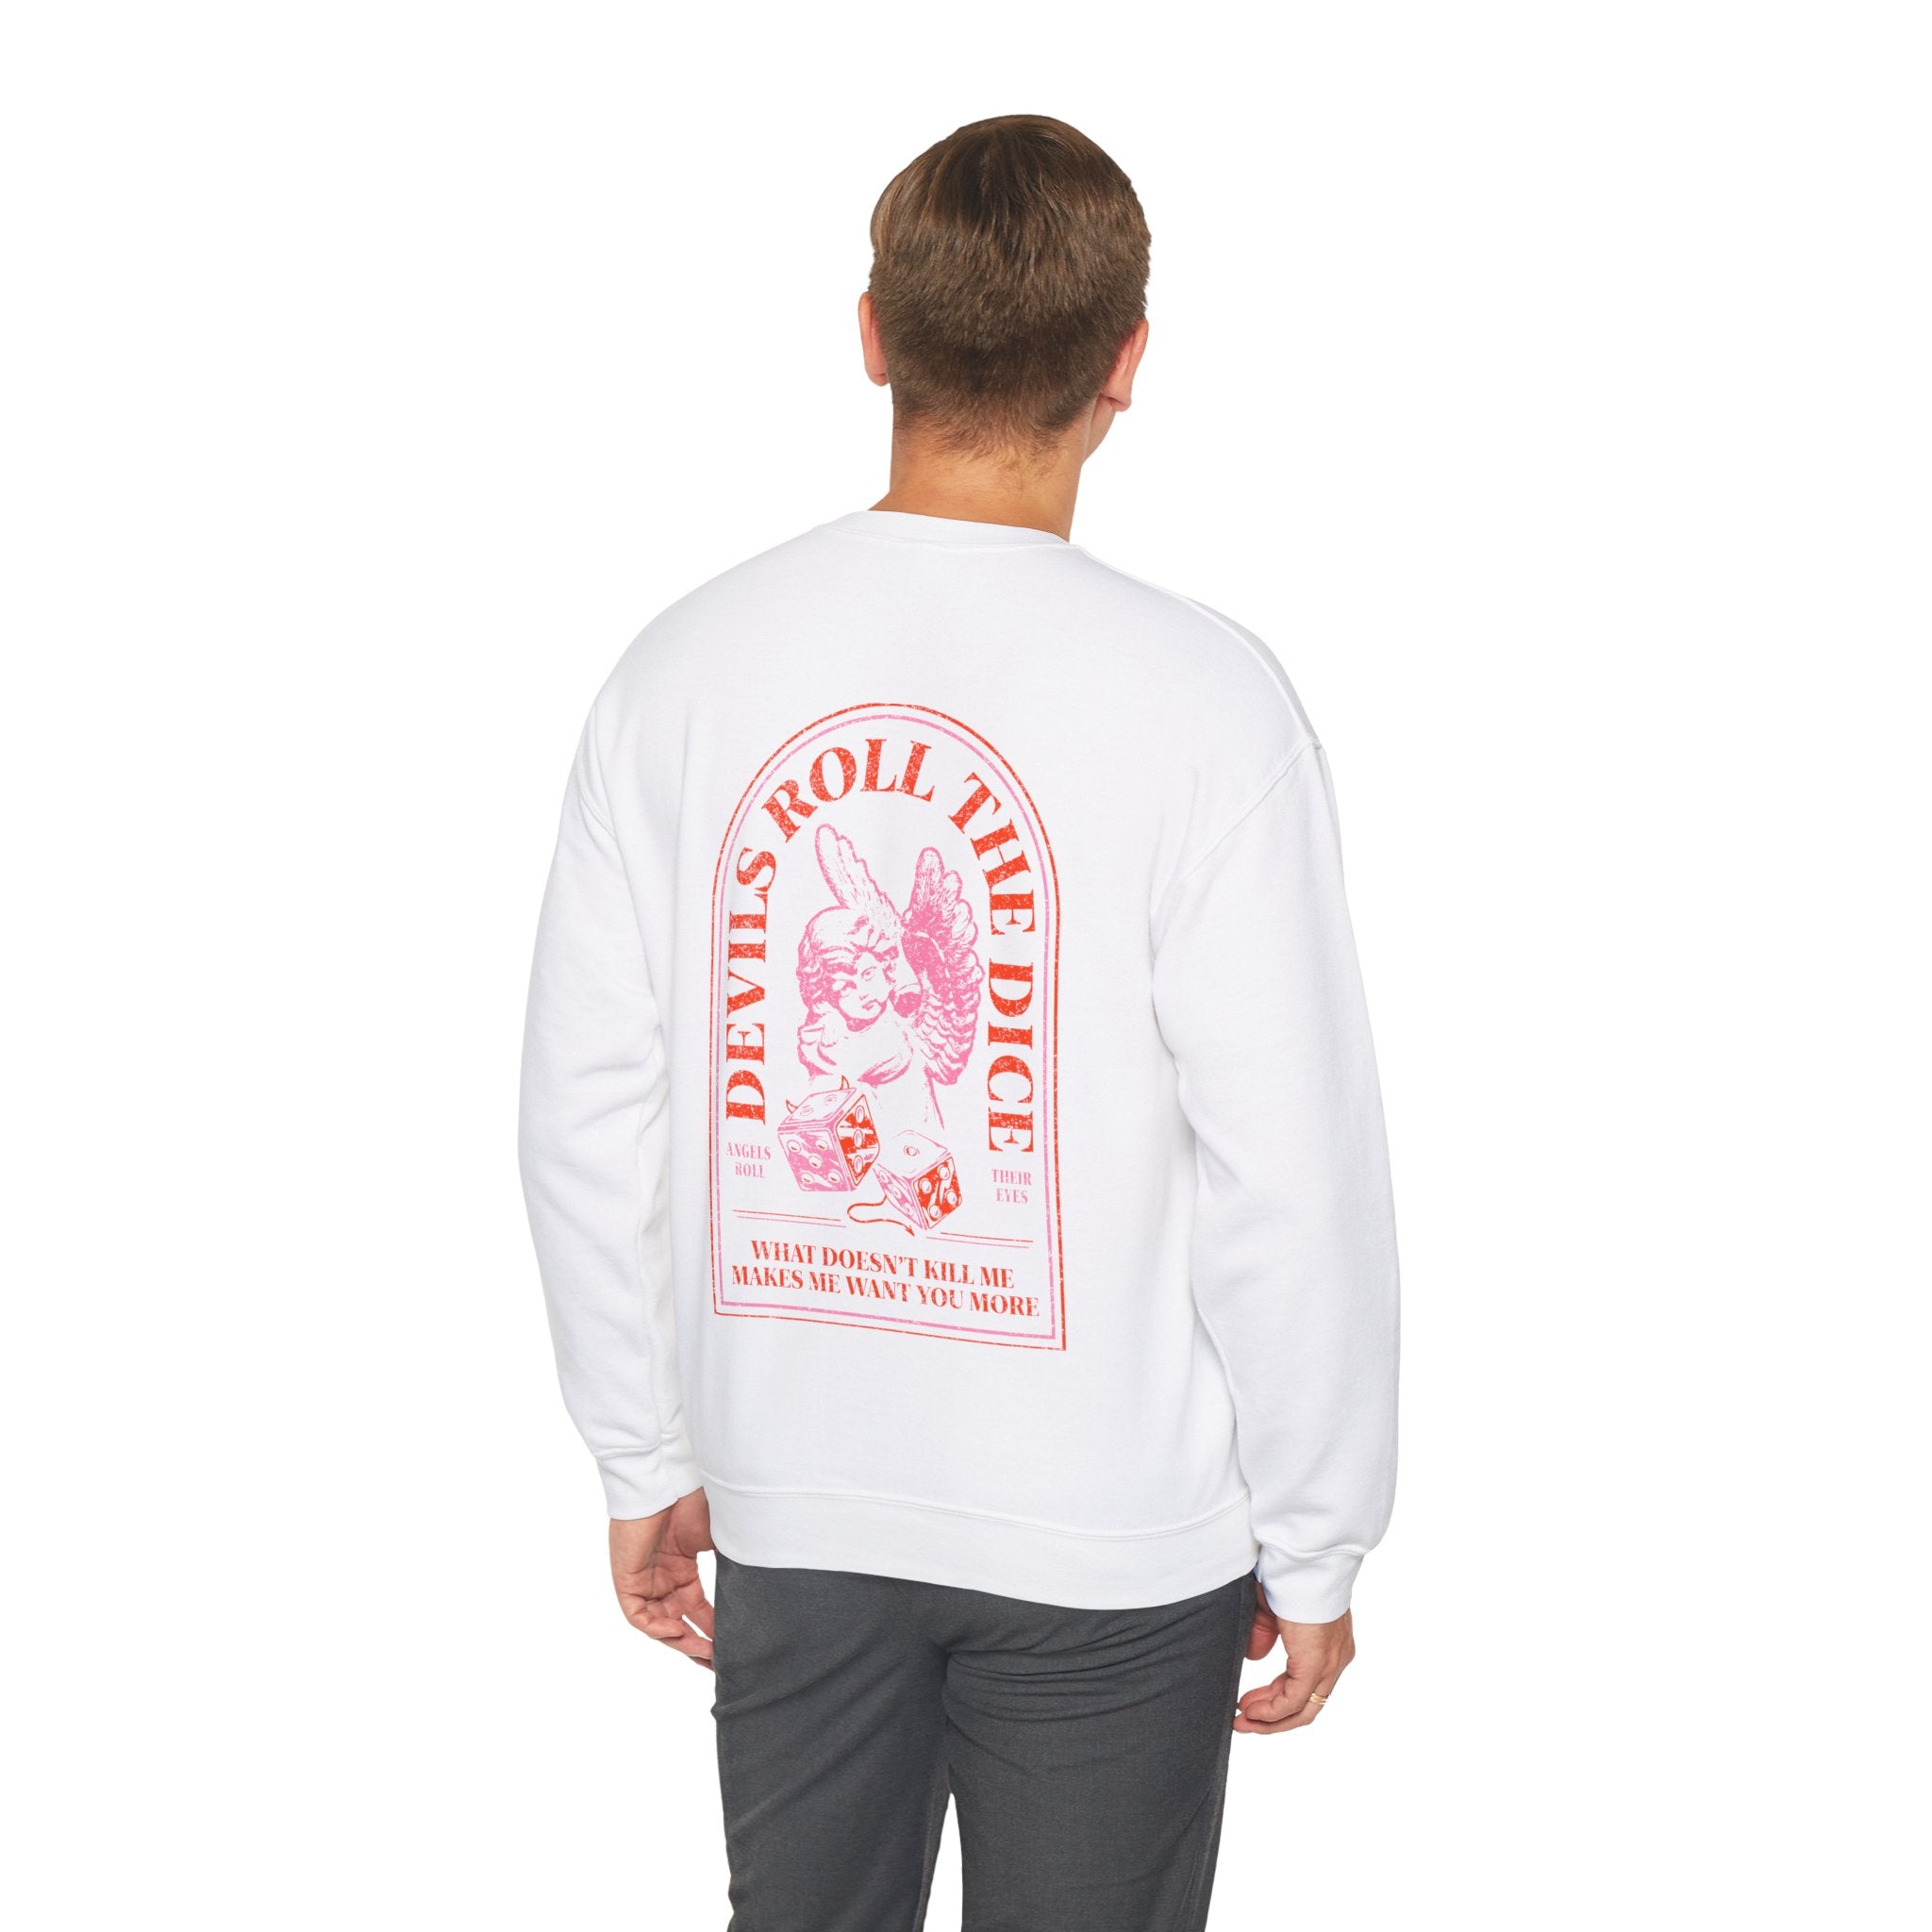 Devils Roll The Dice, Angels Roll Their Eyes Crewneck